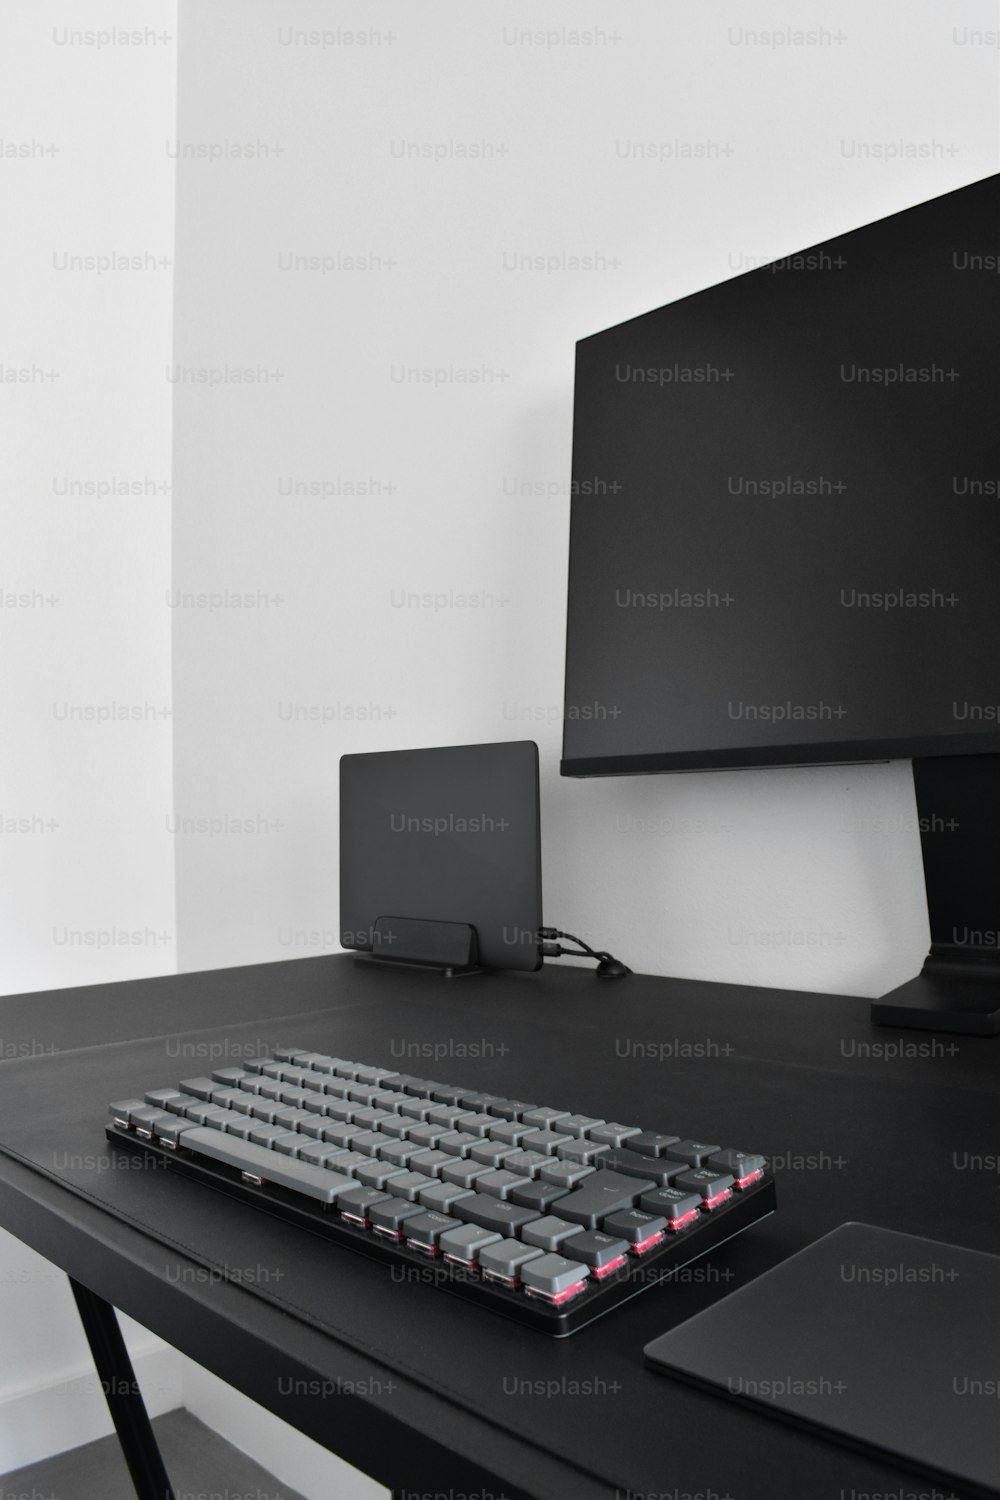 a computer keyboard sitting on top of a black desk